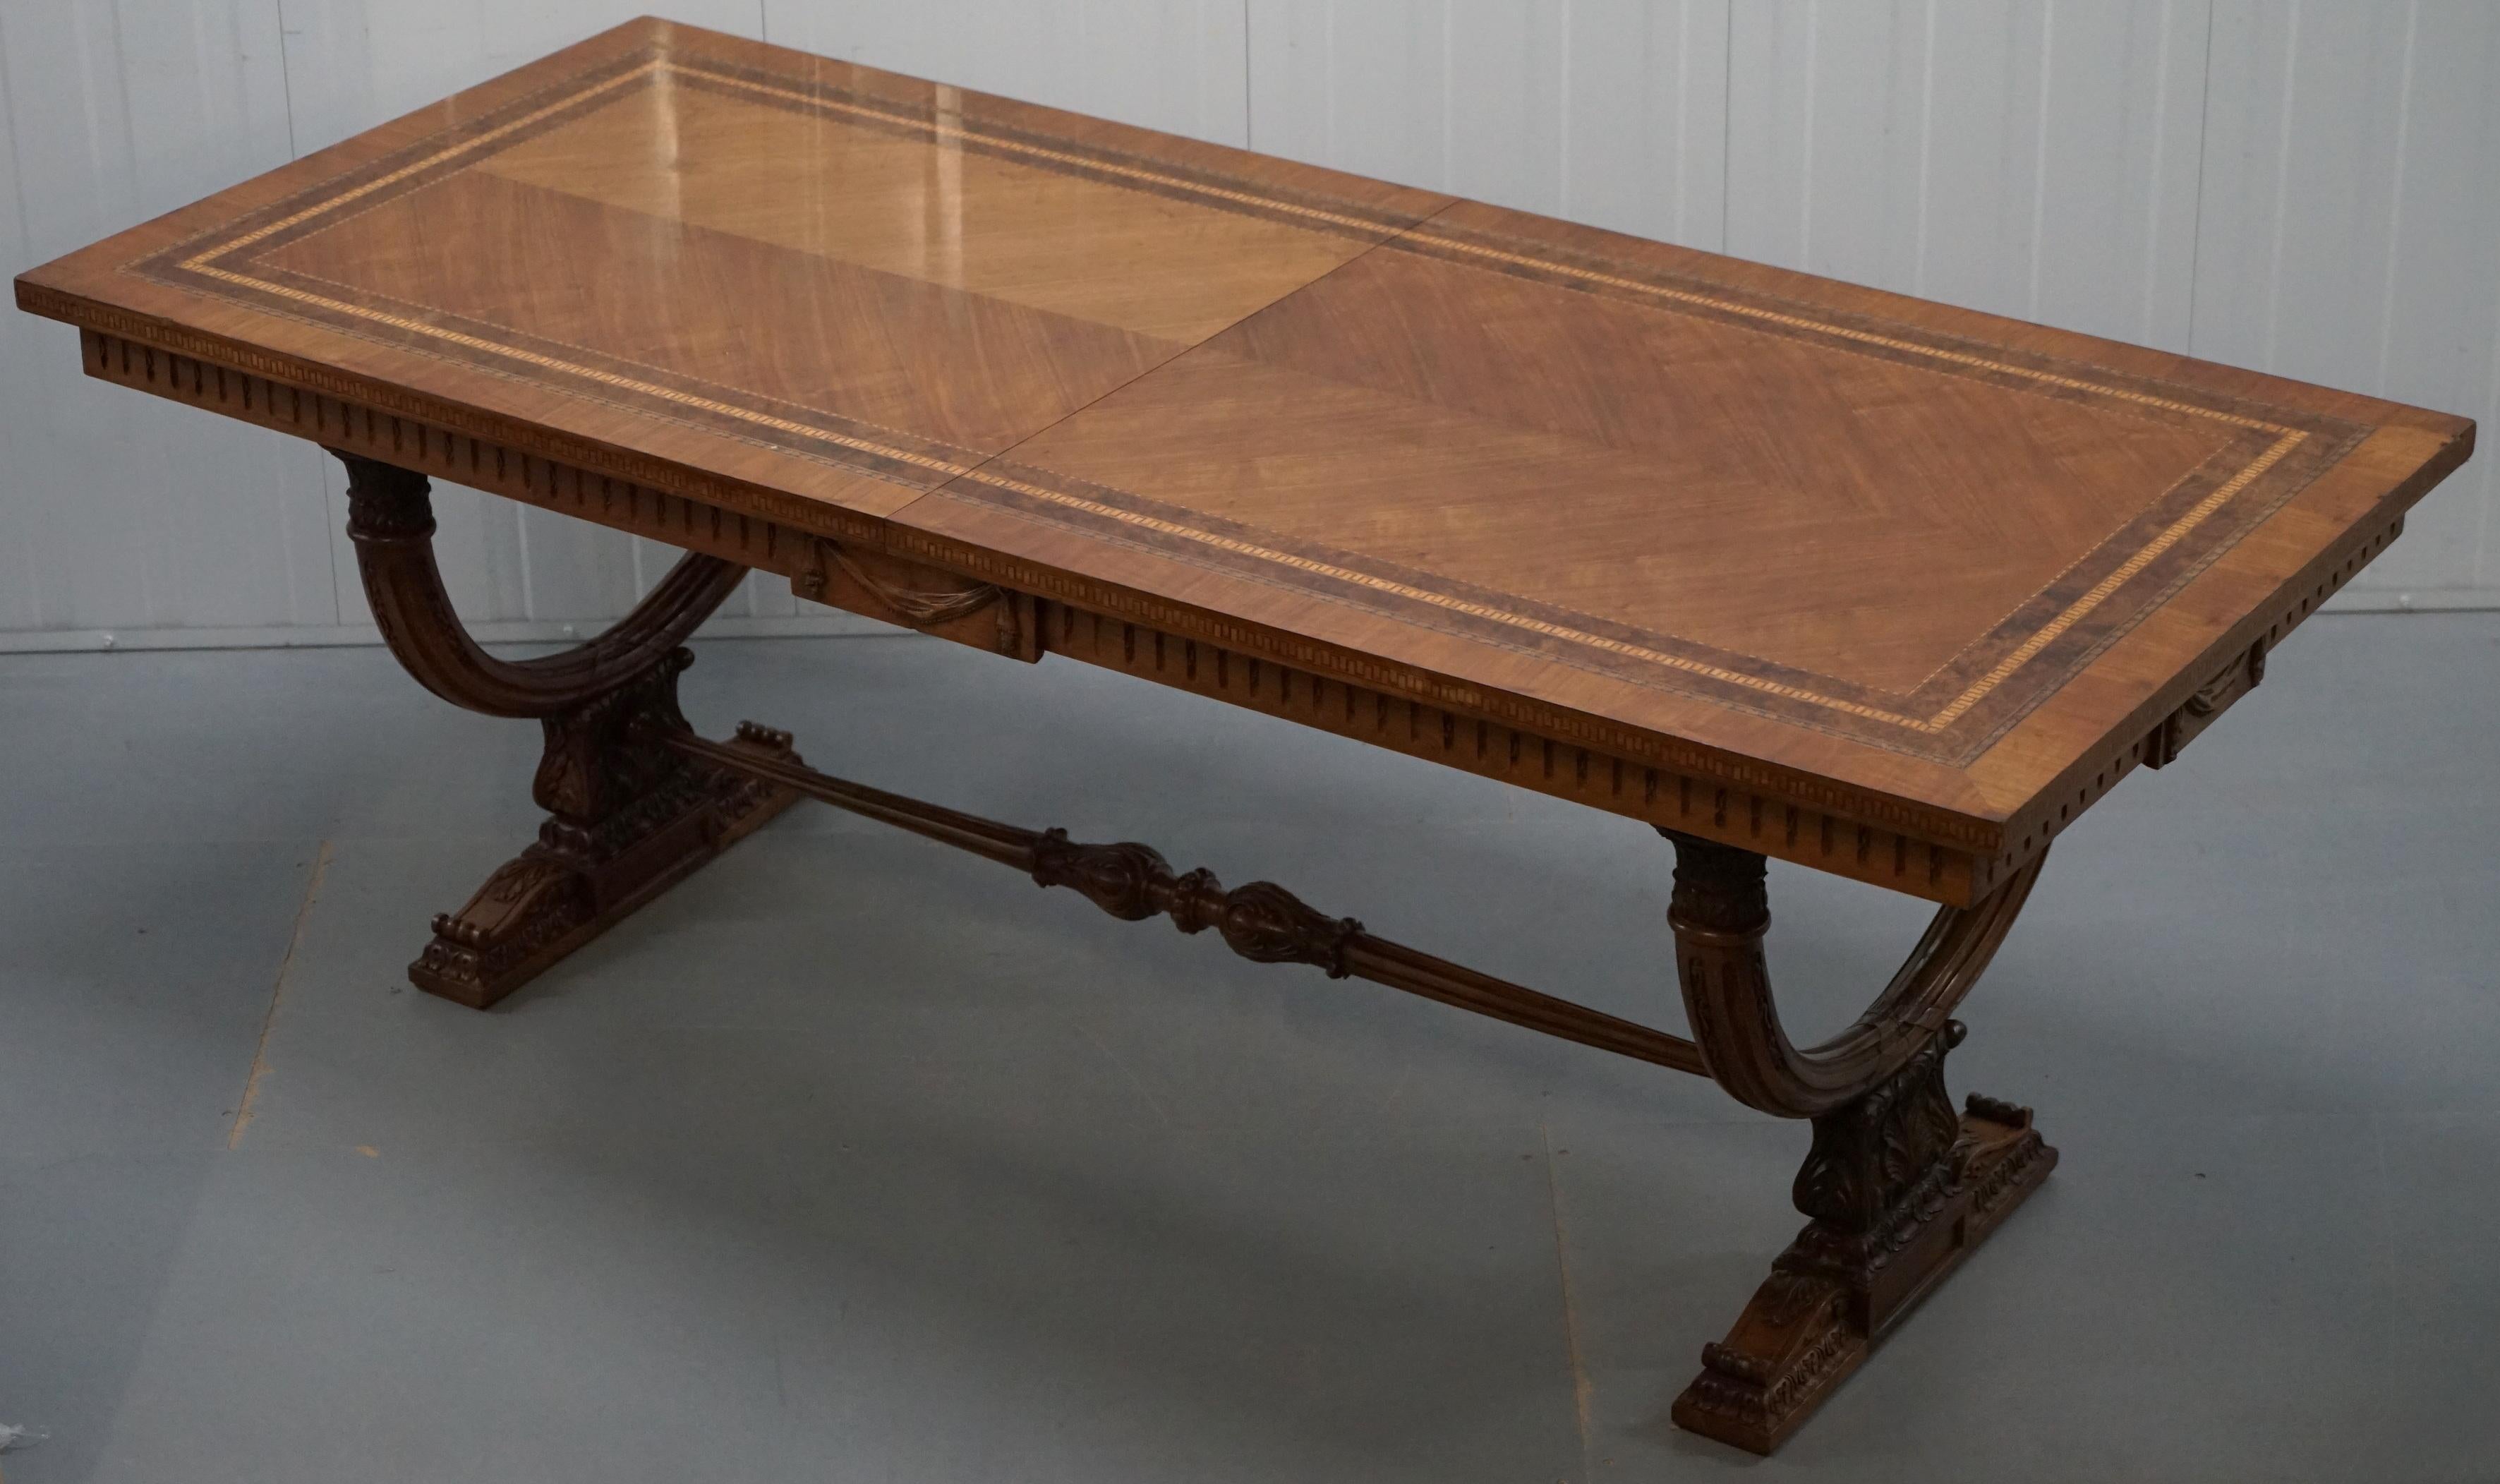 We are delighted to offer for sale this absolutely stunning handmade in Italy antique extending dining table with Roman Empire style carved detailing throughout

A very good looking and well-made table, dated to the 19th century, the walnut top is